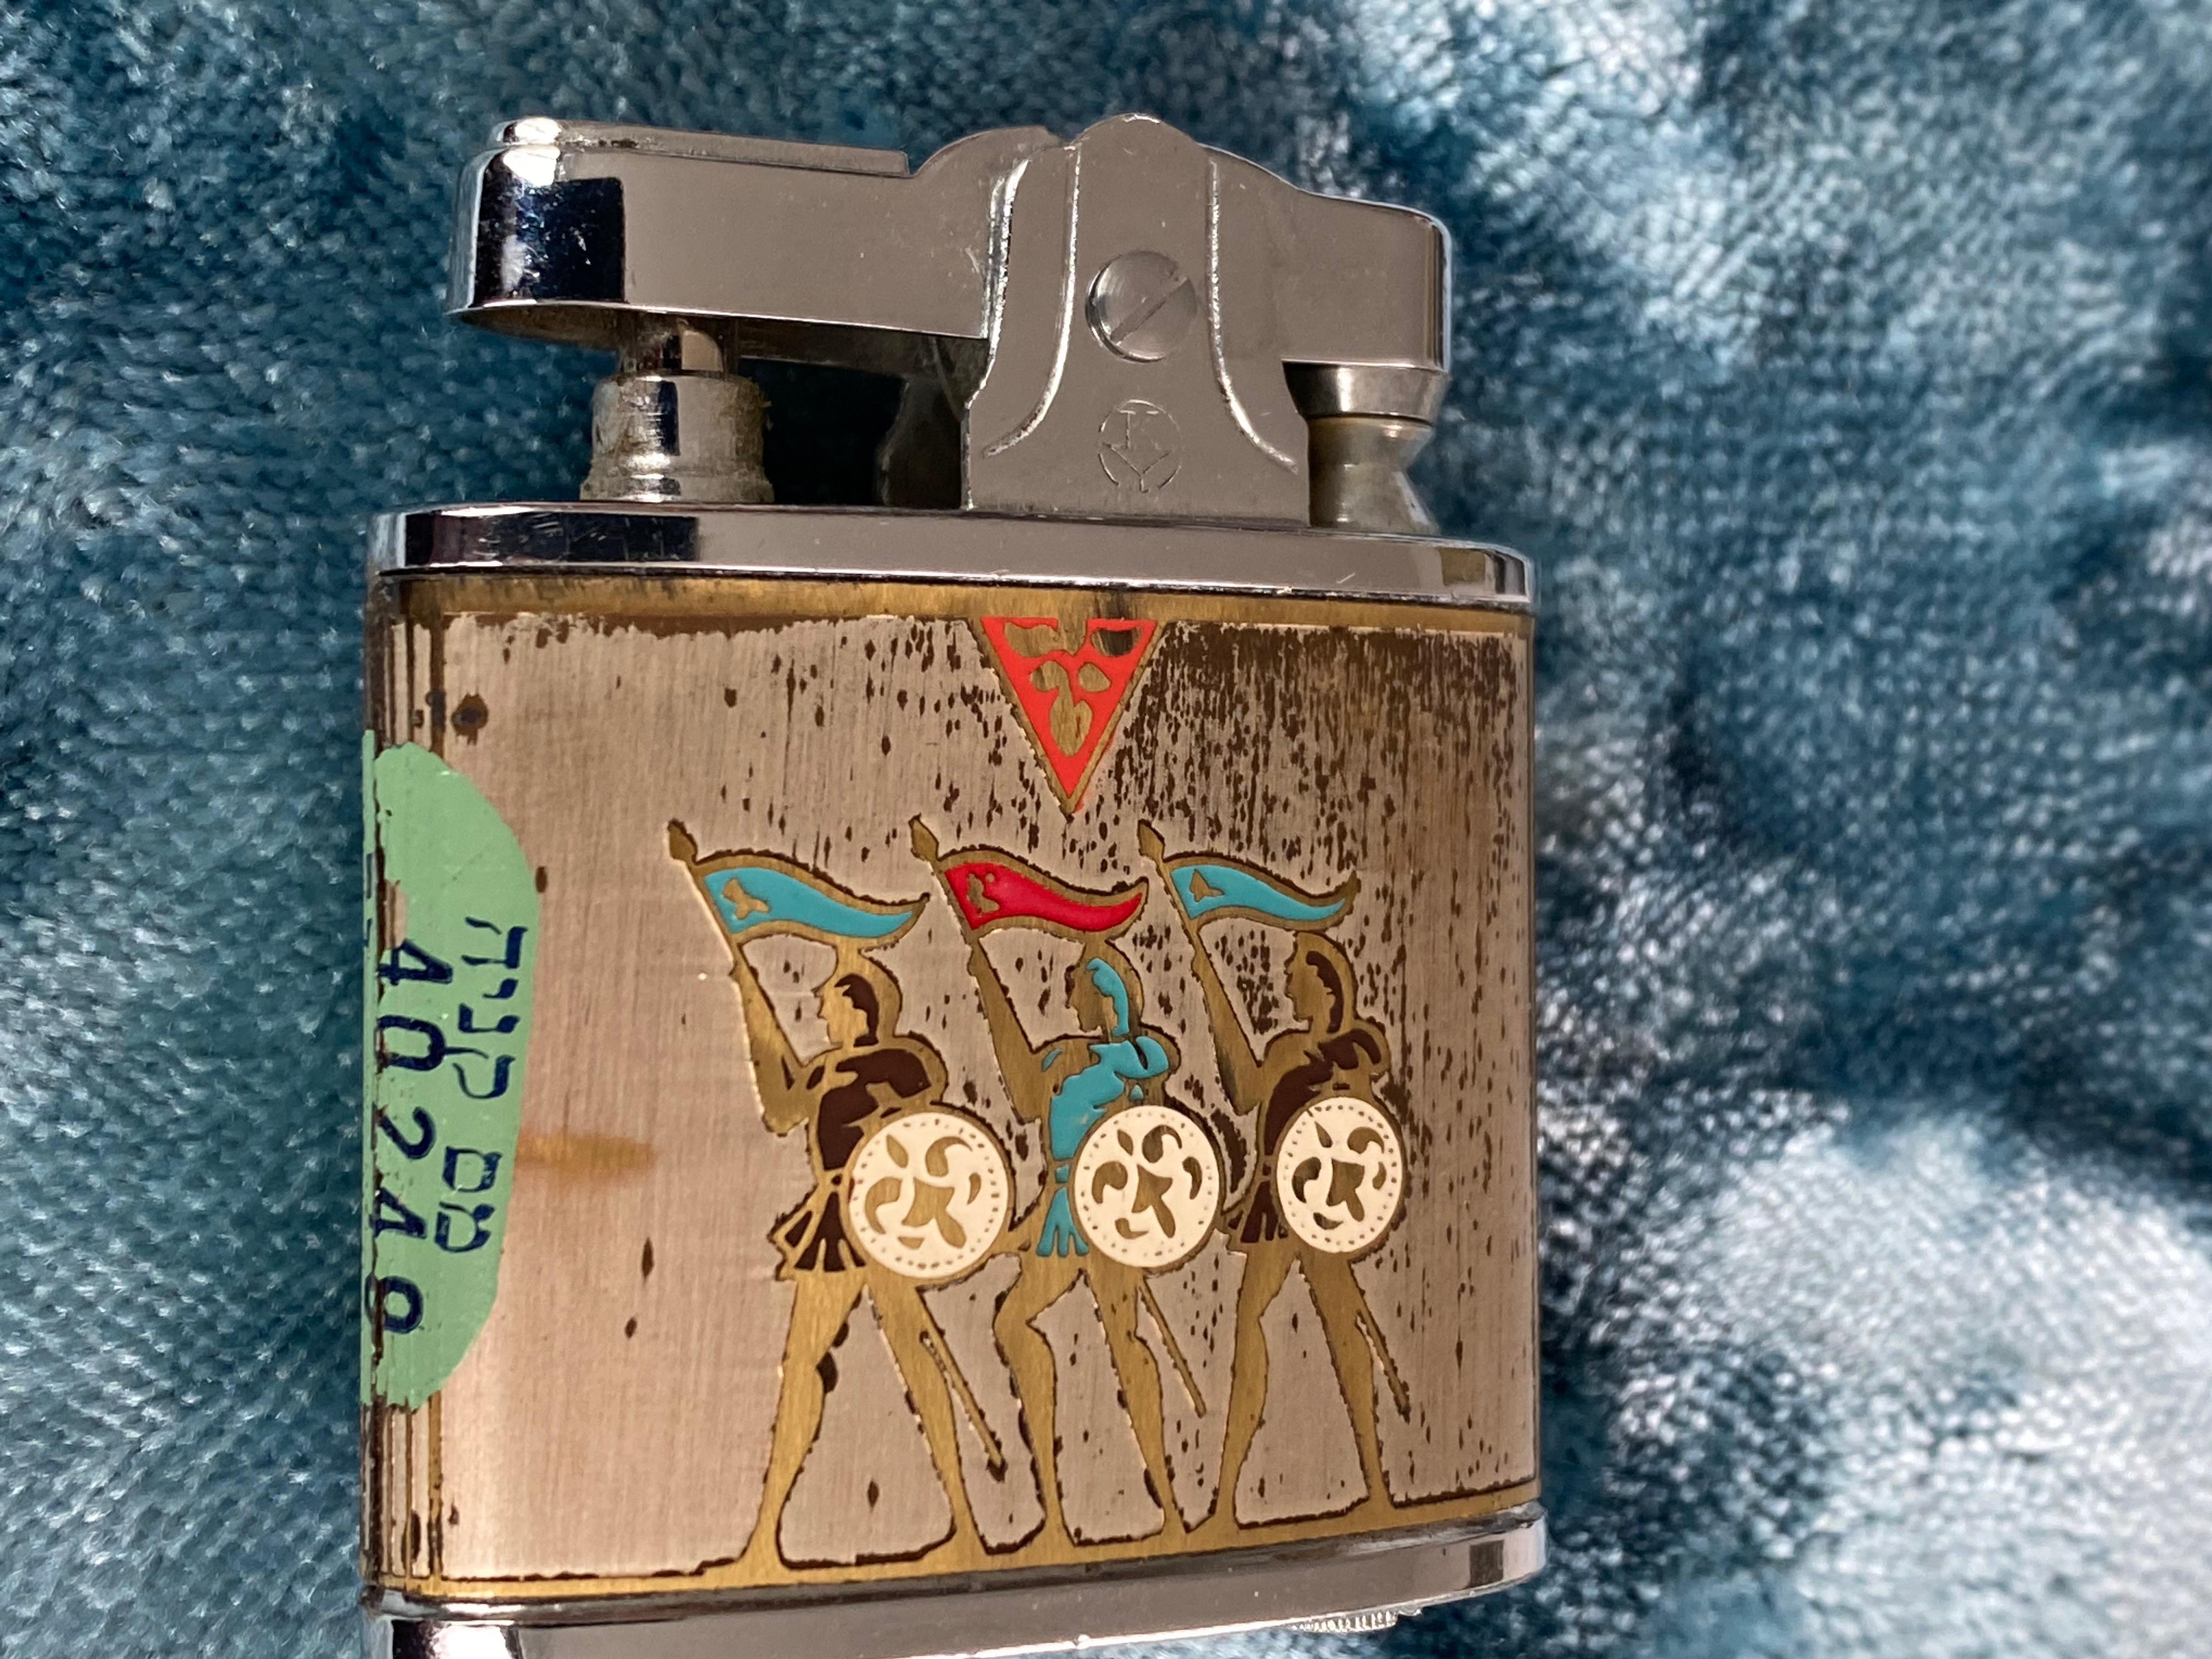 Retro, late 1960s to 1970s
This lighter is from a lot bound to the holy land and it has never been used or sold in the stores, it still bears the marking of the customs. A rare and fun collector find and is part of a limited series listed here.